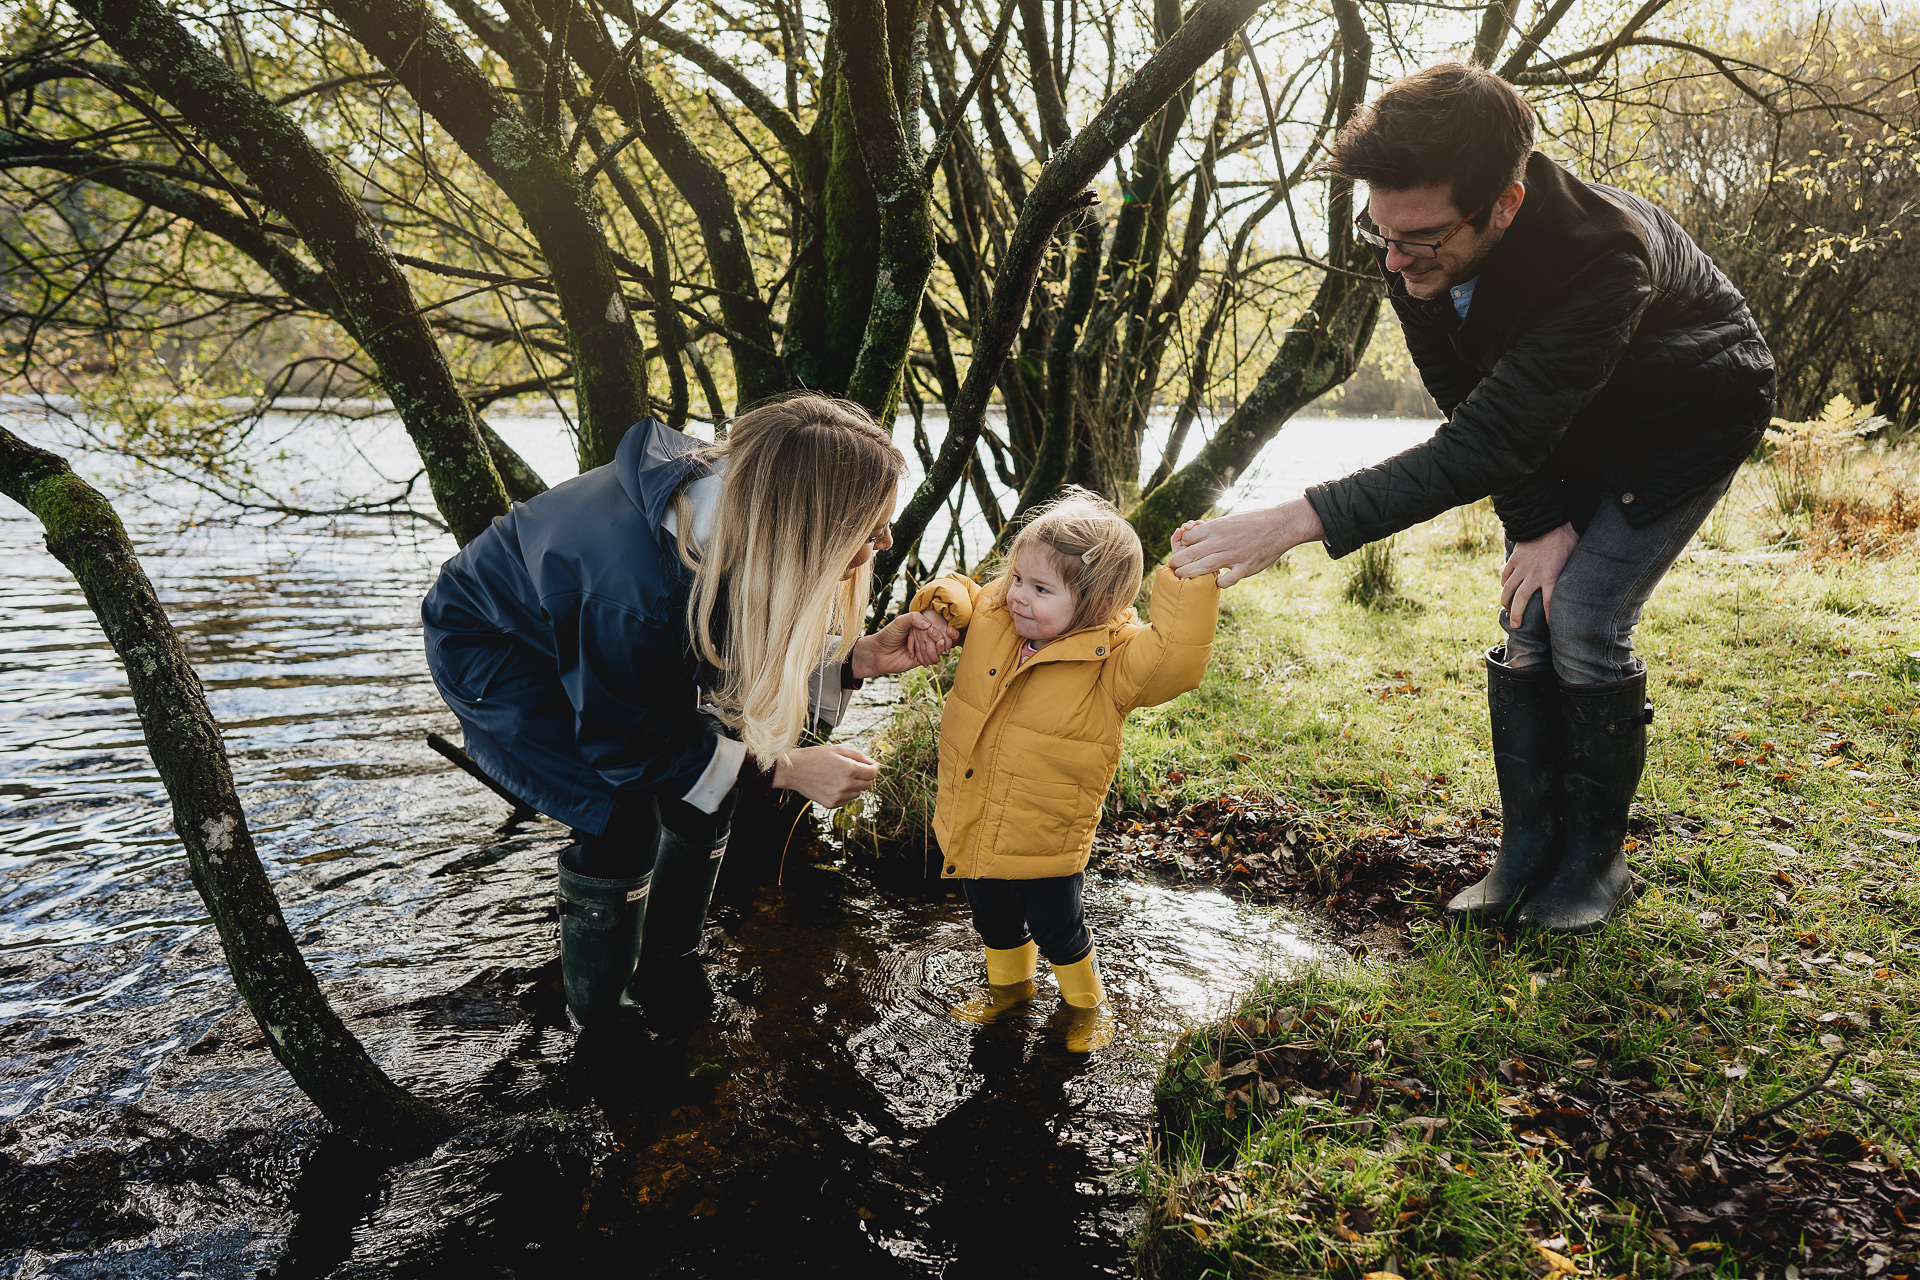 A family photography session on Dartmoor with a young girl in a yellow raincoat splashing in some water with her parents